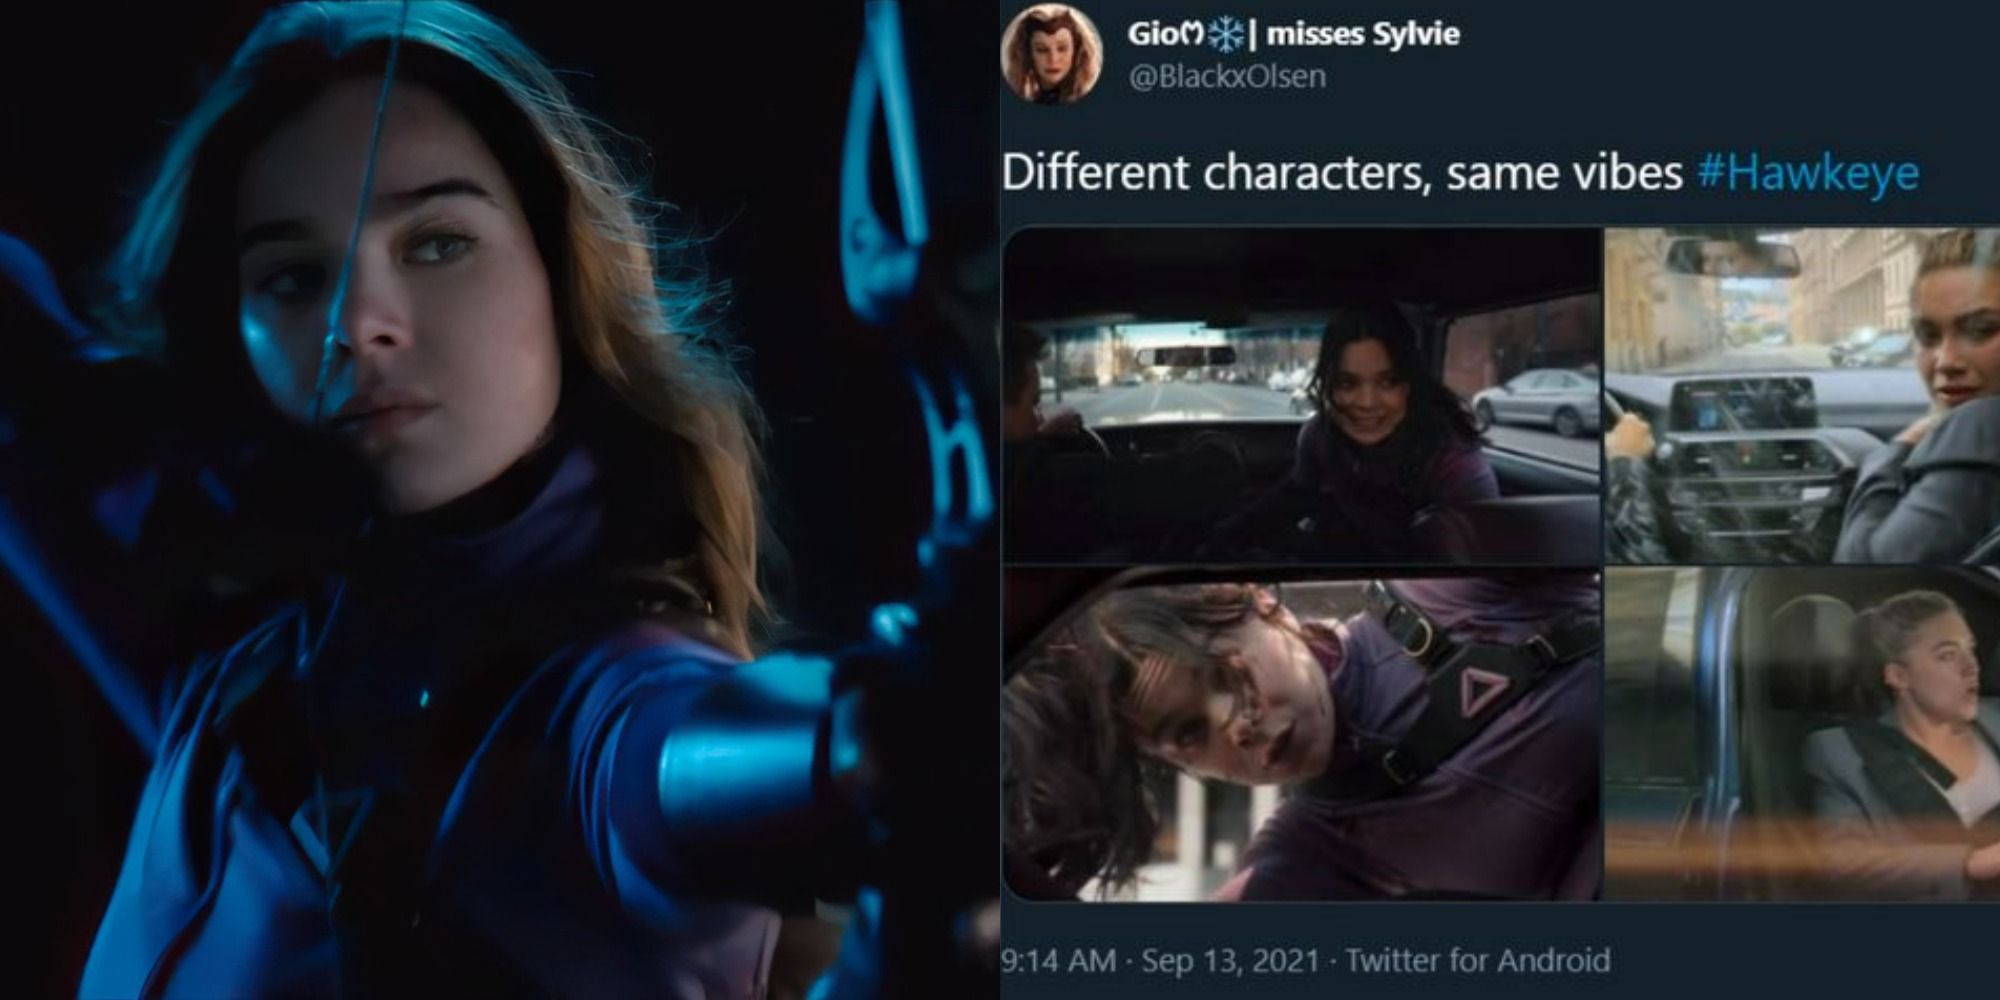 Kate Bishop aims an arrow and a tweet about same vibes of Kate and Yelena